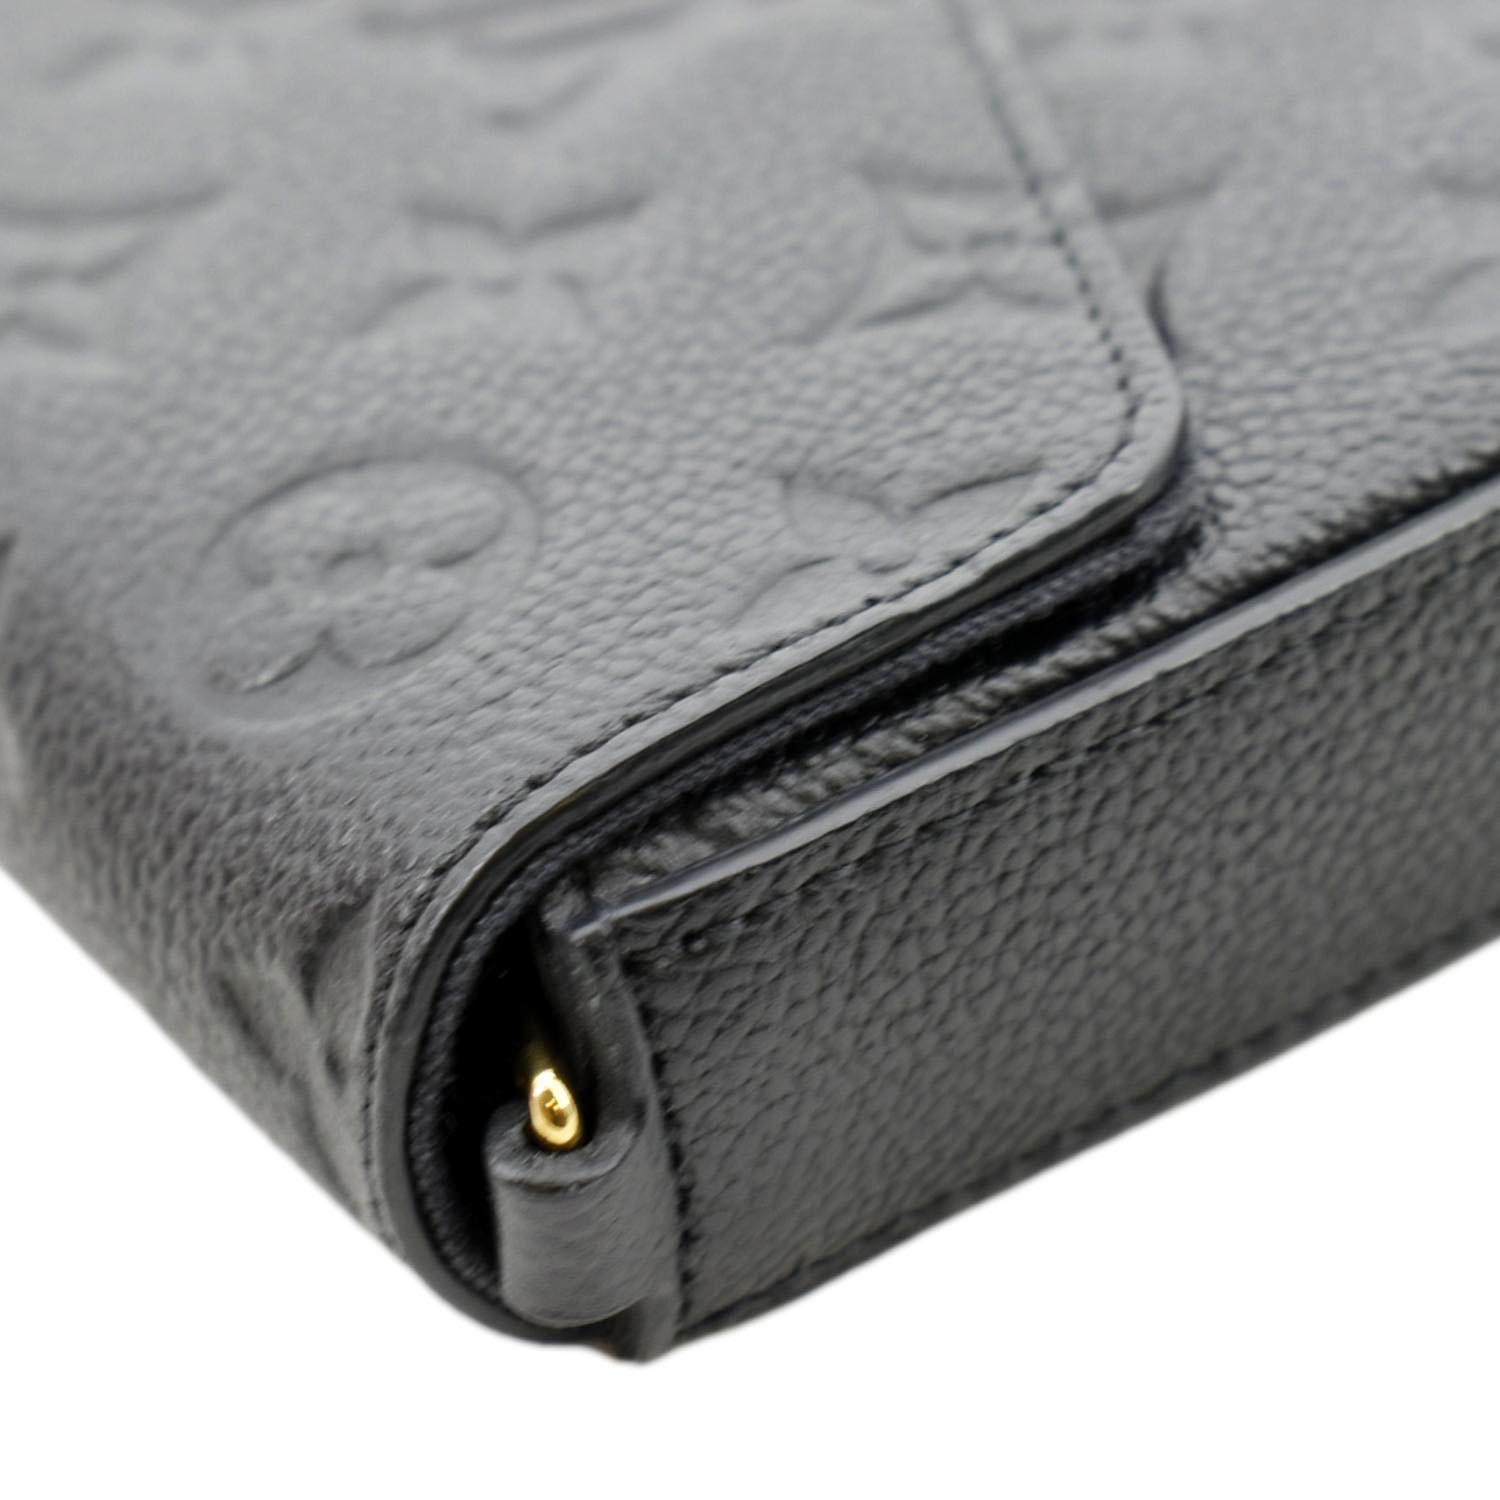 Pochette To-Go Monogram Shadow Leather - Wallets and Small Leather Goods